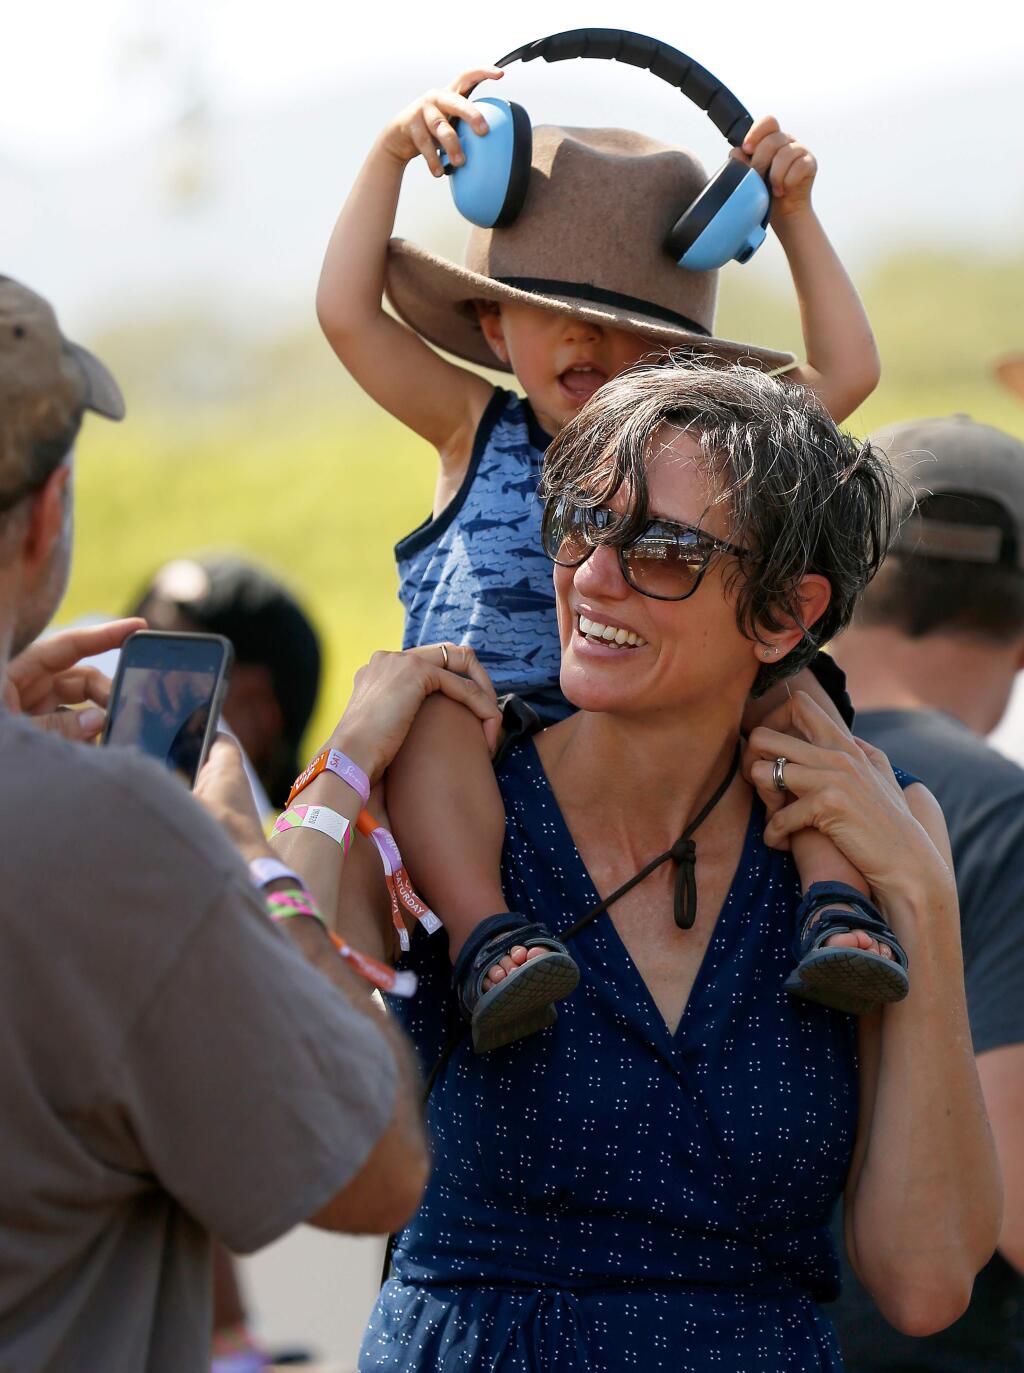 Catherine Long of Oakland carries her son Monk Kasper, 2, as he tries to don ear protection while wearing her hat, as they listen to Mandolin Orange performing on stage, during the first day of the Sonoma Harvest Music Festival at B.R. Cohn Winery and Olive Oil Company, in Glen Ellen, California, on Saturday, September 14, 2019. (Alvin Jornada / The Press Democrat)